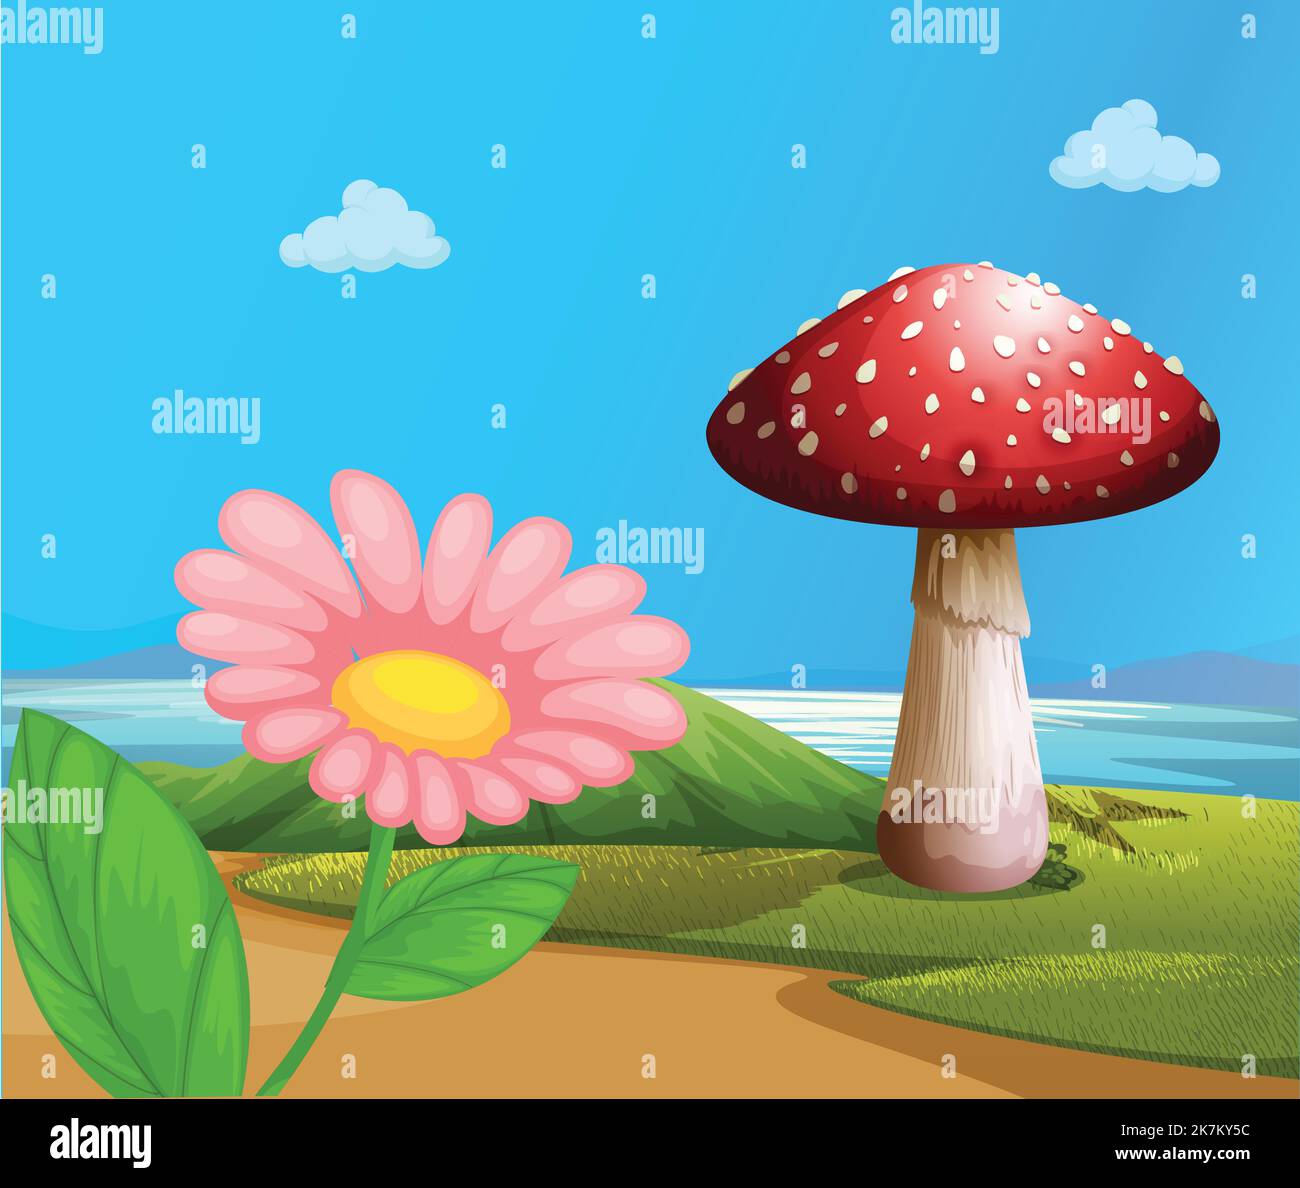 enchanted garden, forest near to ocean side. mushroom and flowers. Stock Vector